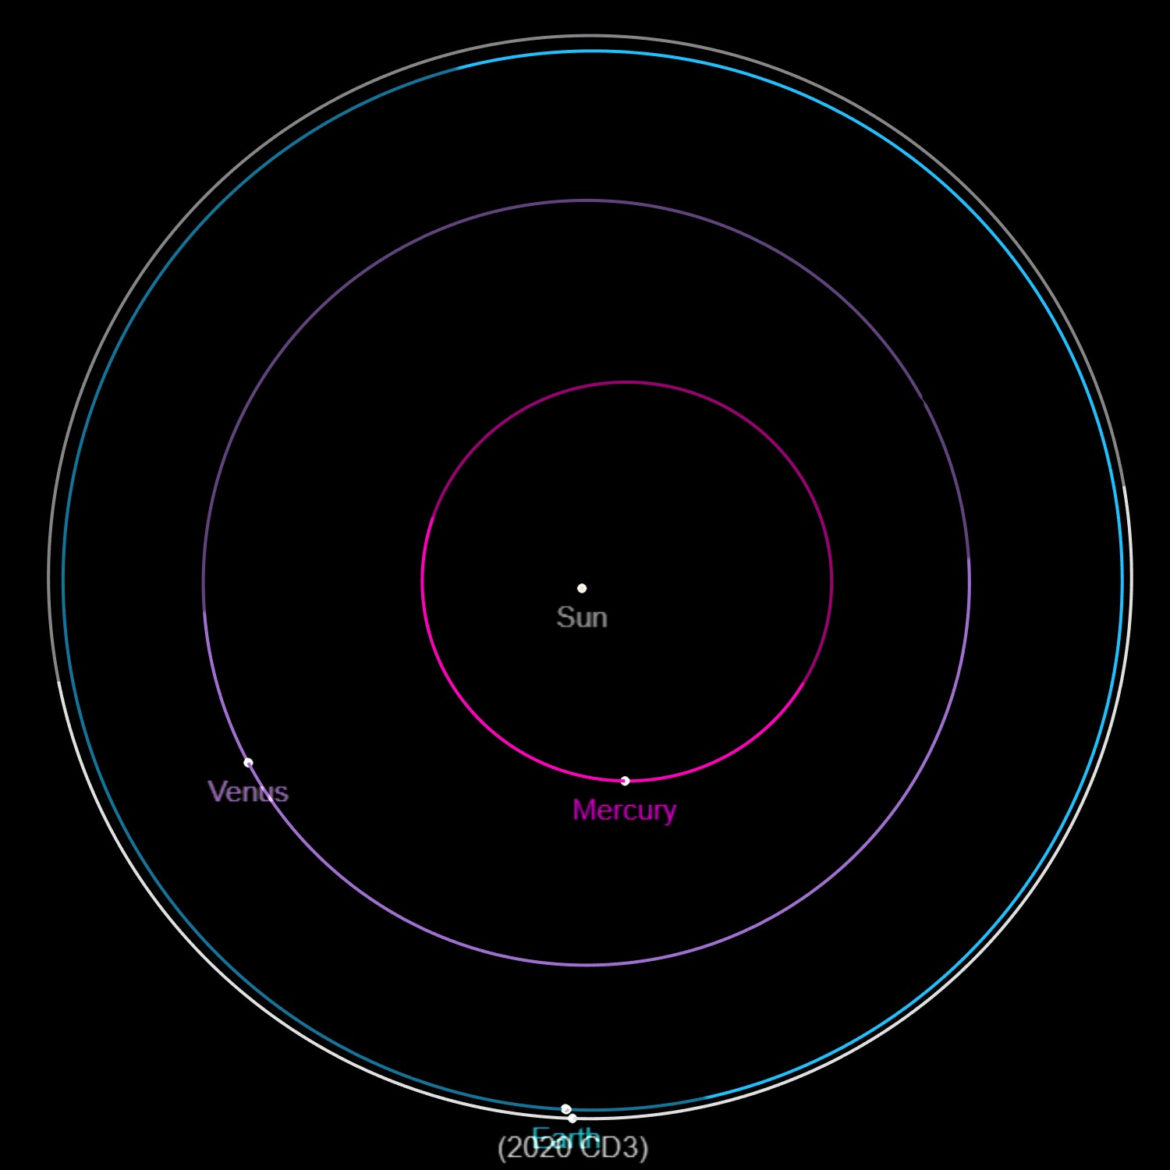 sedna asteroid astrology meaning